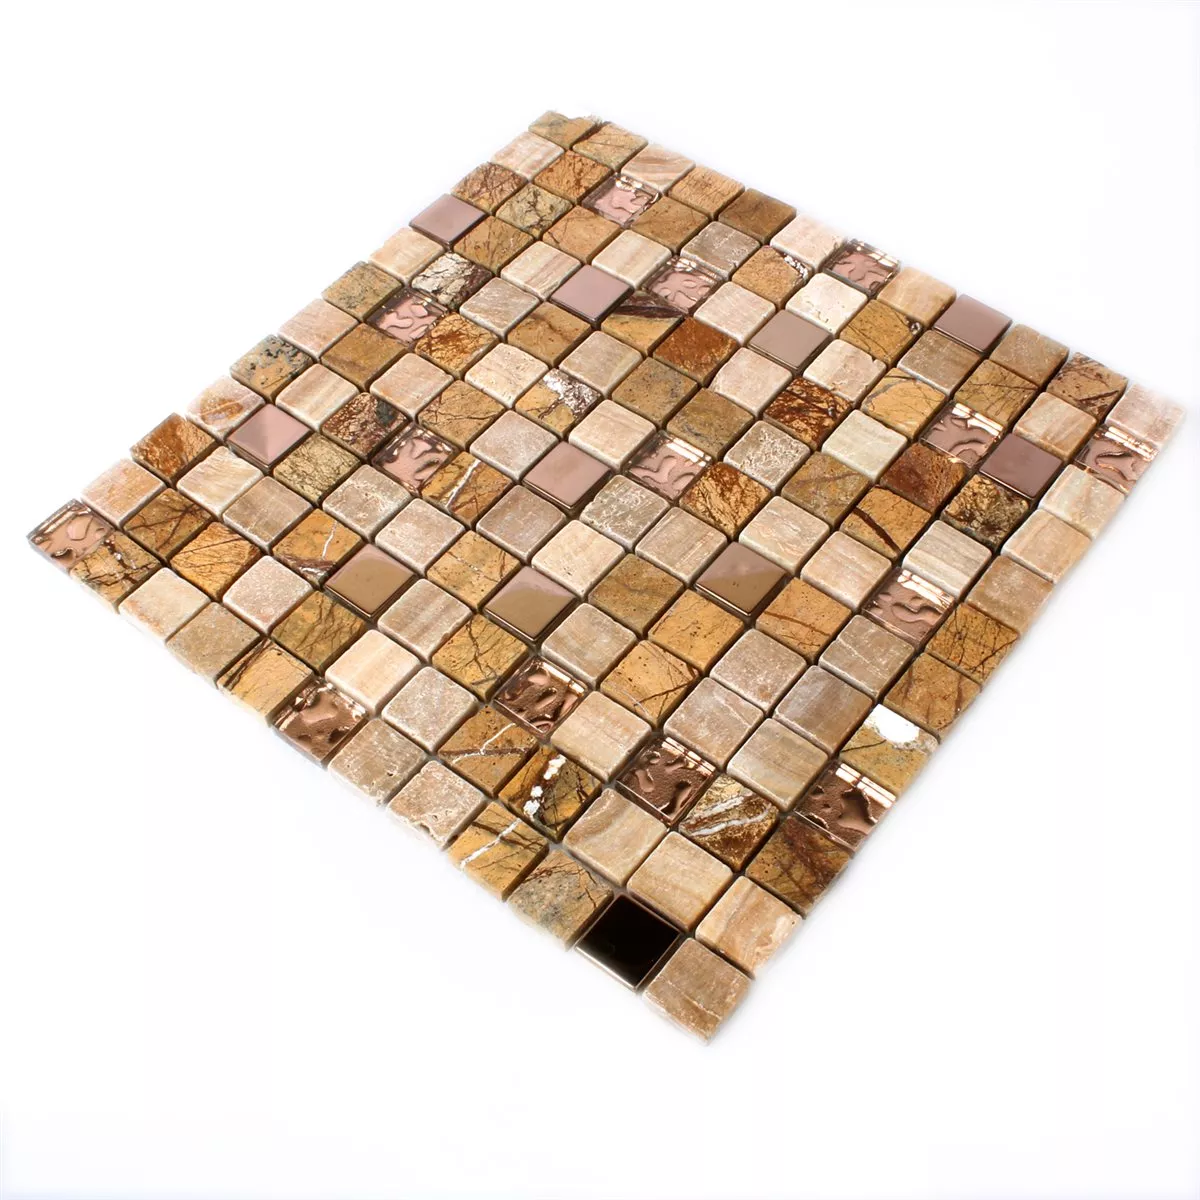 Mosaic Tiles Glass Natural Stone Stainless Steel Brown Mix